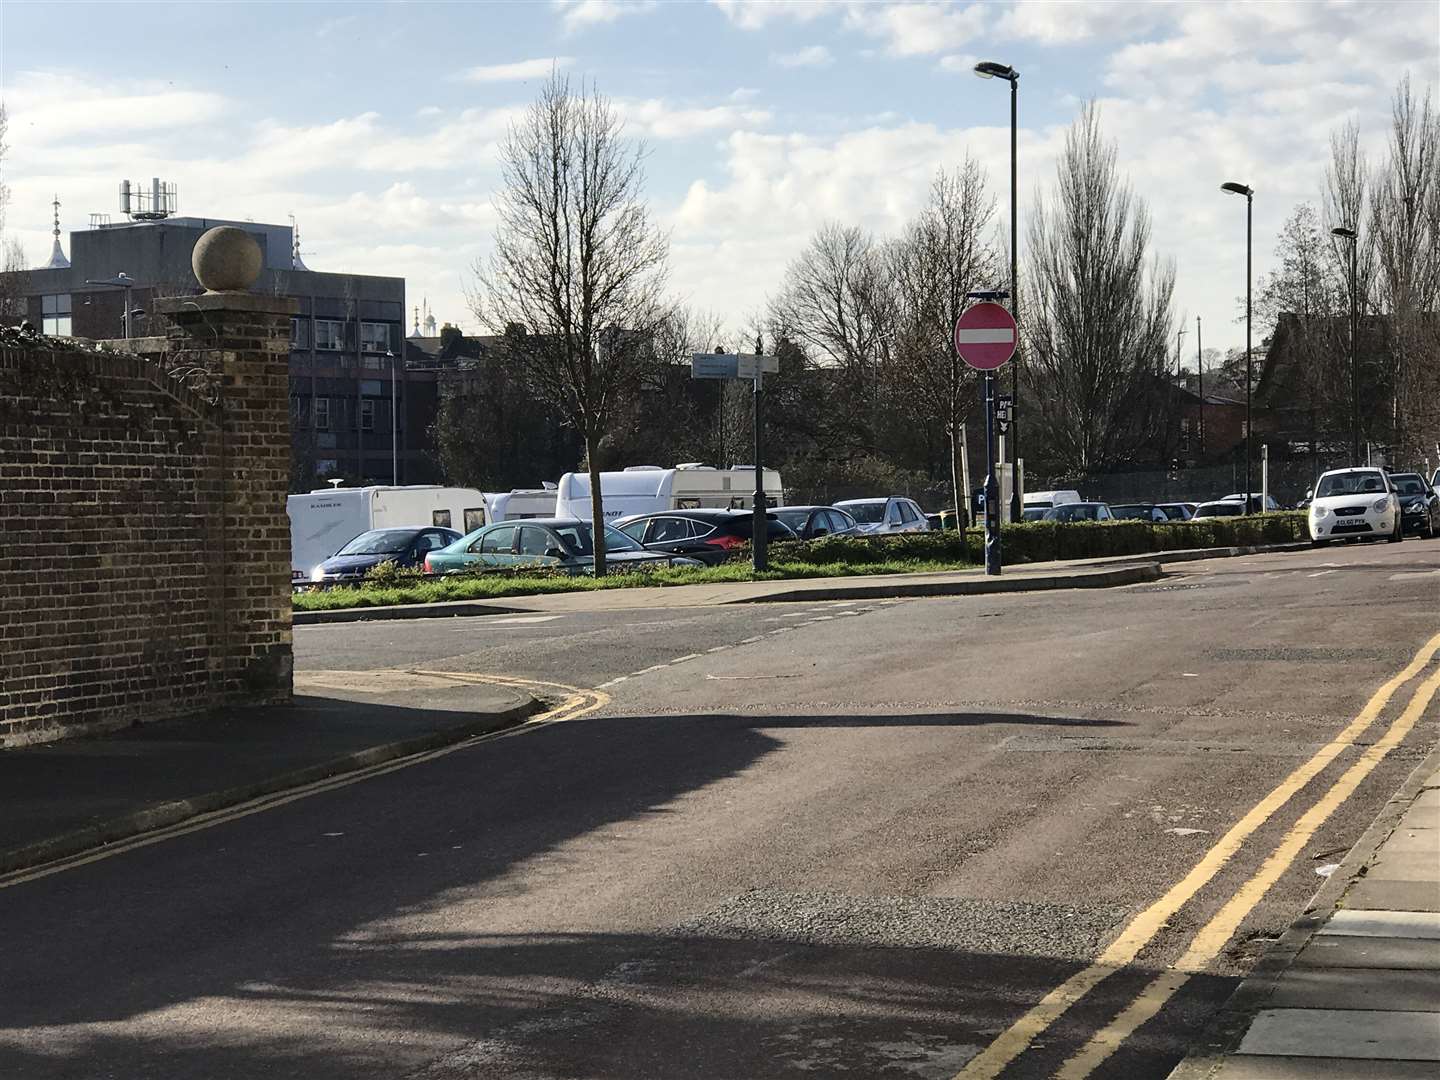 Seven caravans were spotted at the car park, which overlooks Gravesend's promenade